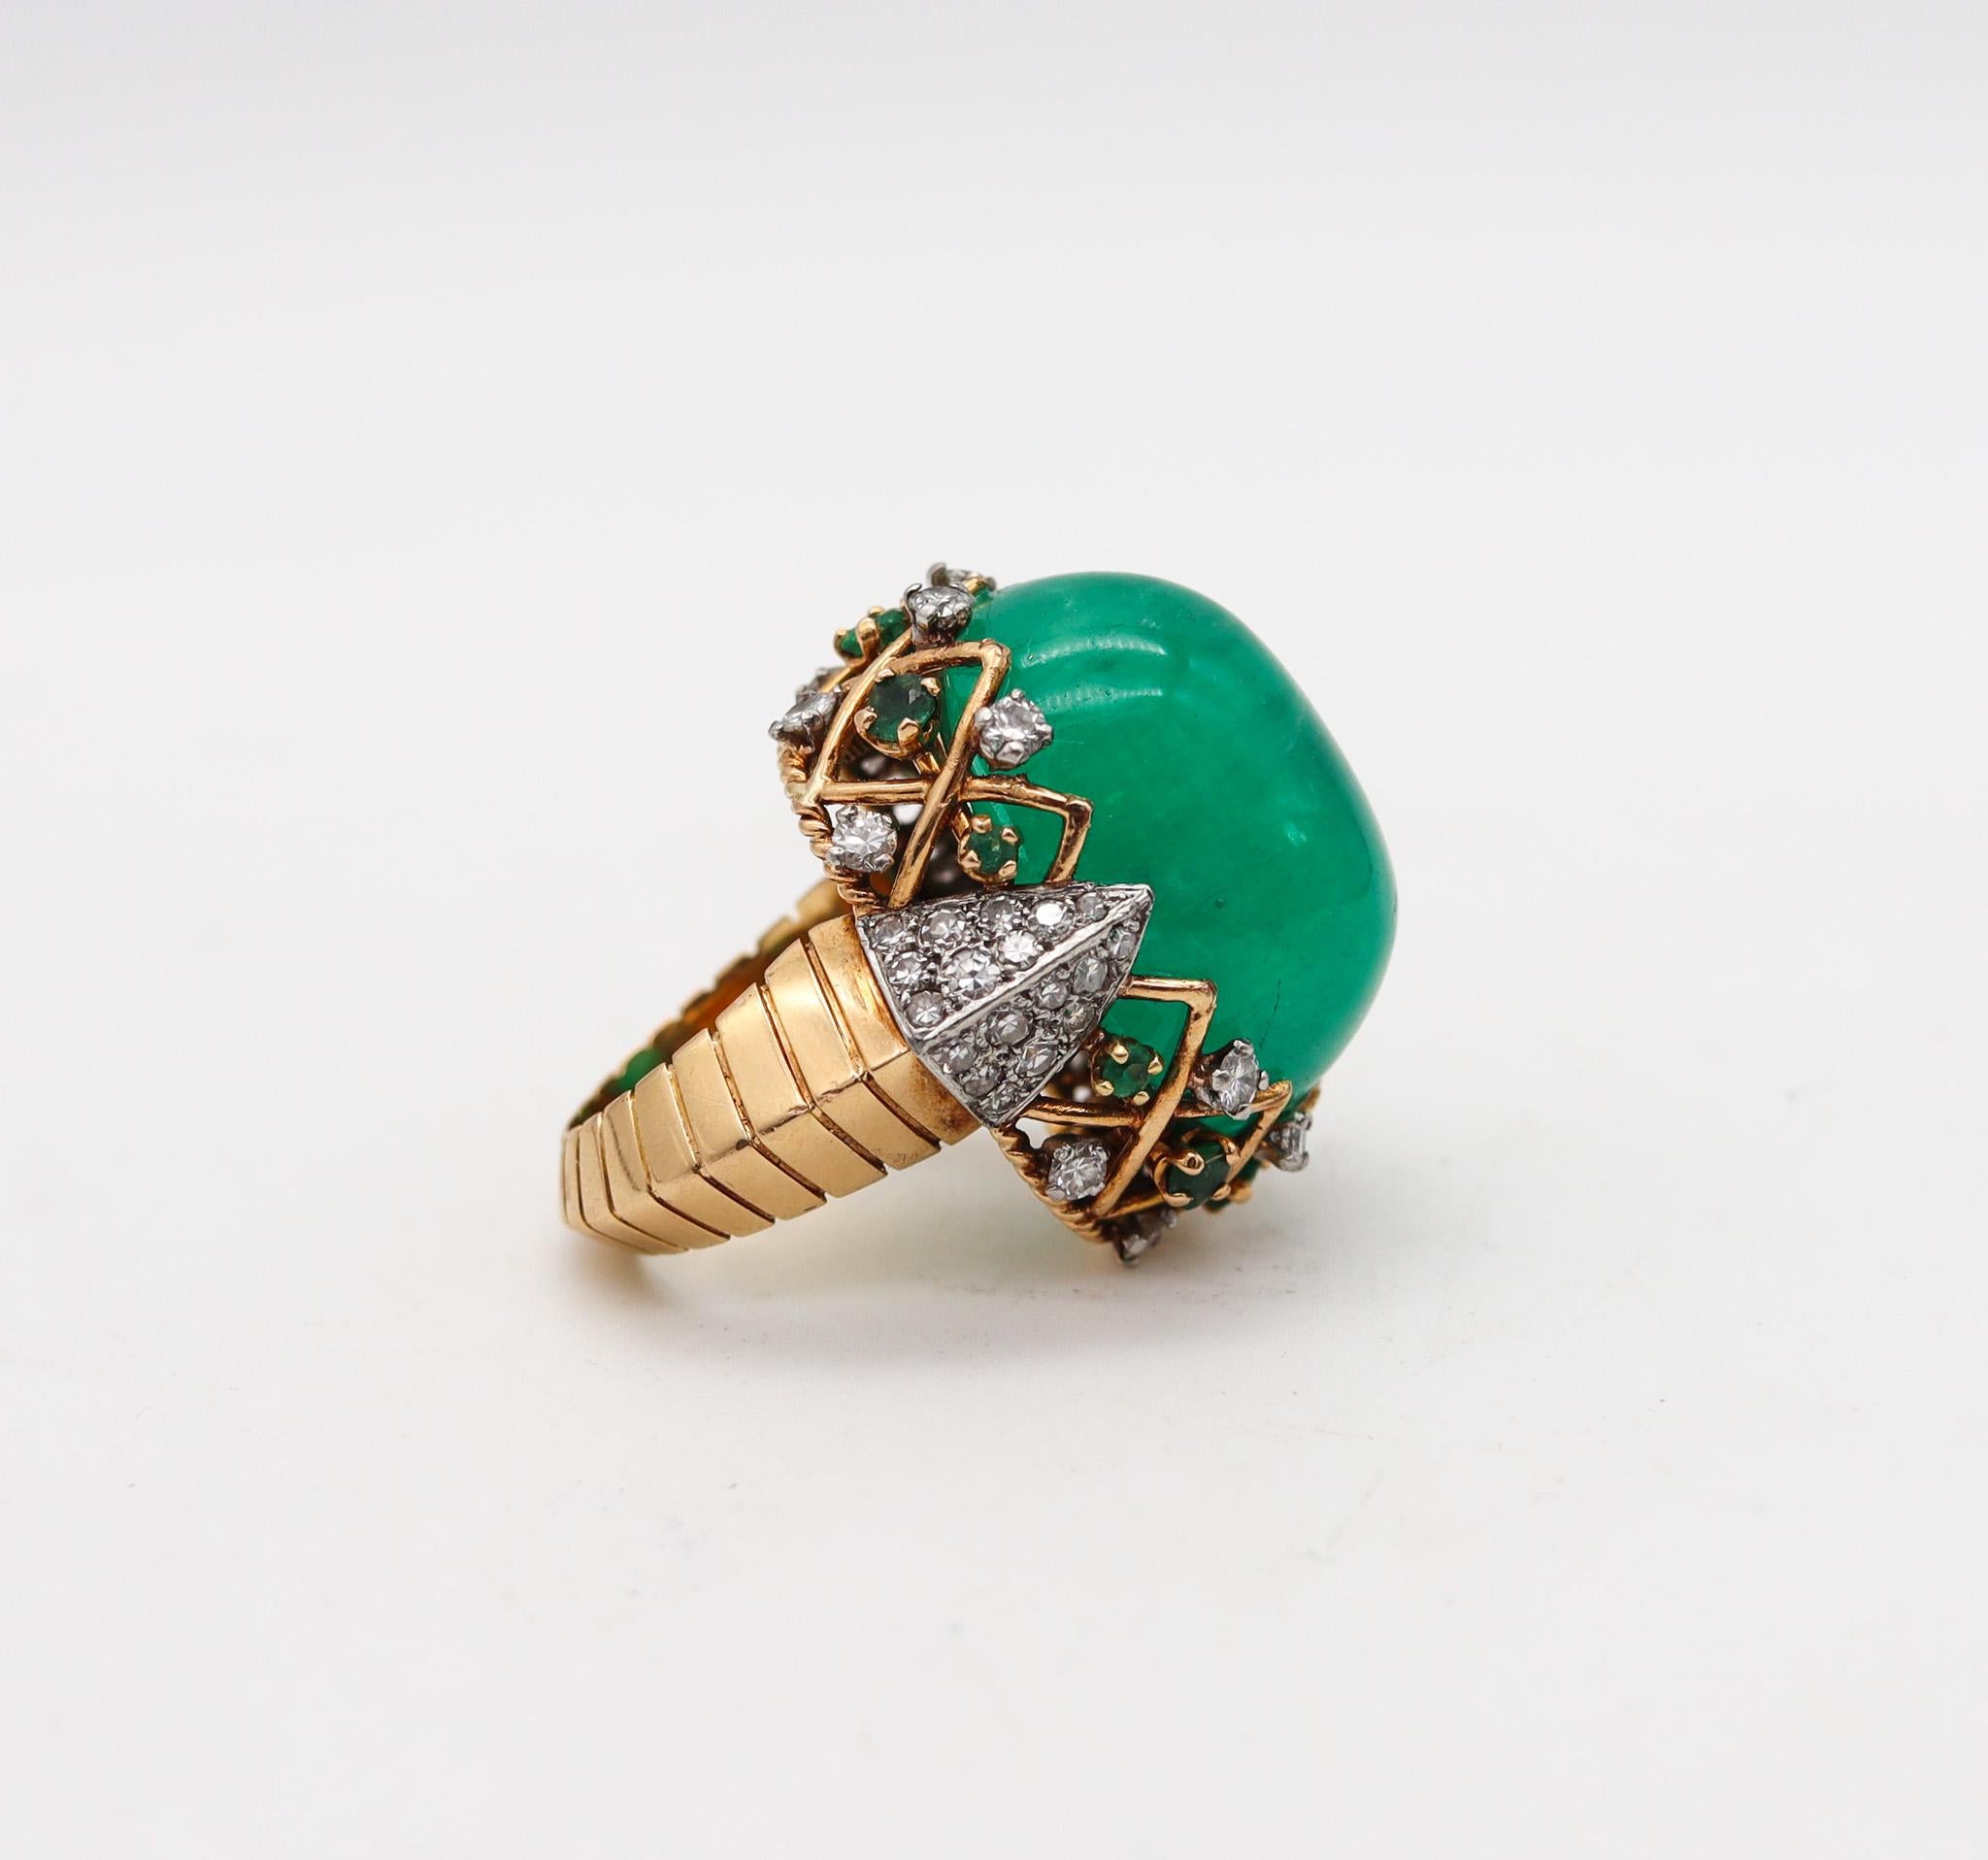 Cocktail ring designed by Pierre Sterlé.

Gorgeous cocktail ring, created in Paris France during the postwar period back in the 1950. This voluptuous and unique ring is a very rare one, designed by Pierre Sterlé and carefully crafted with intricate